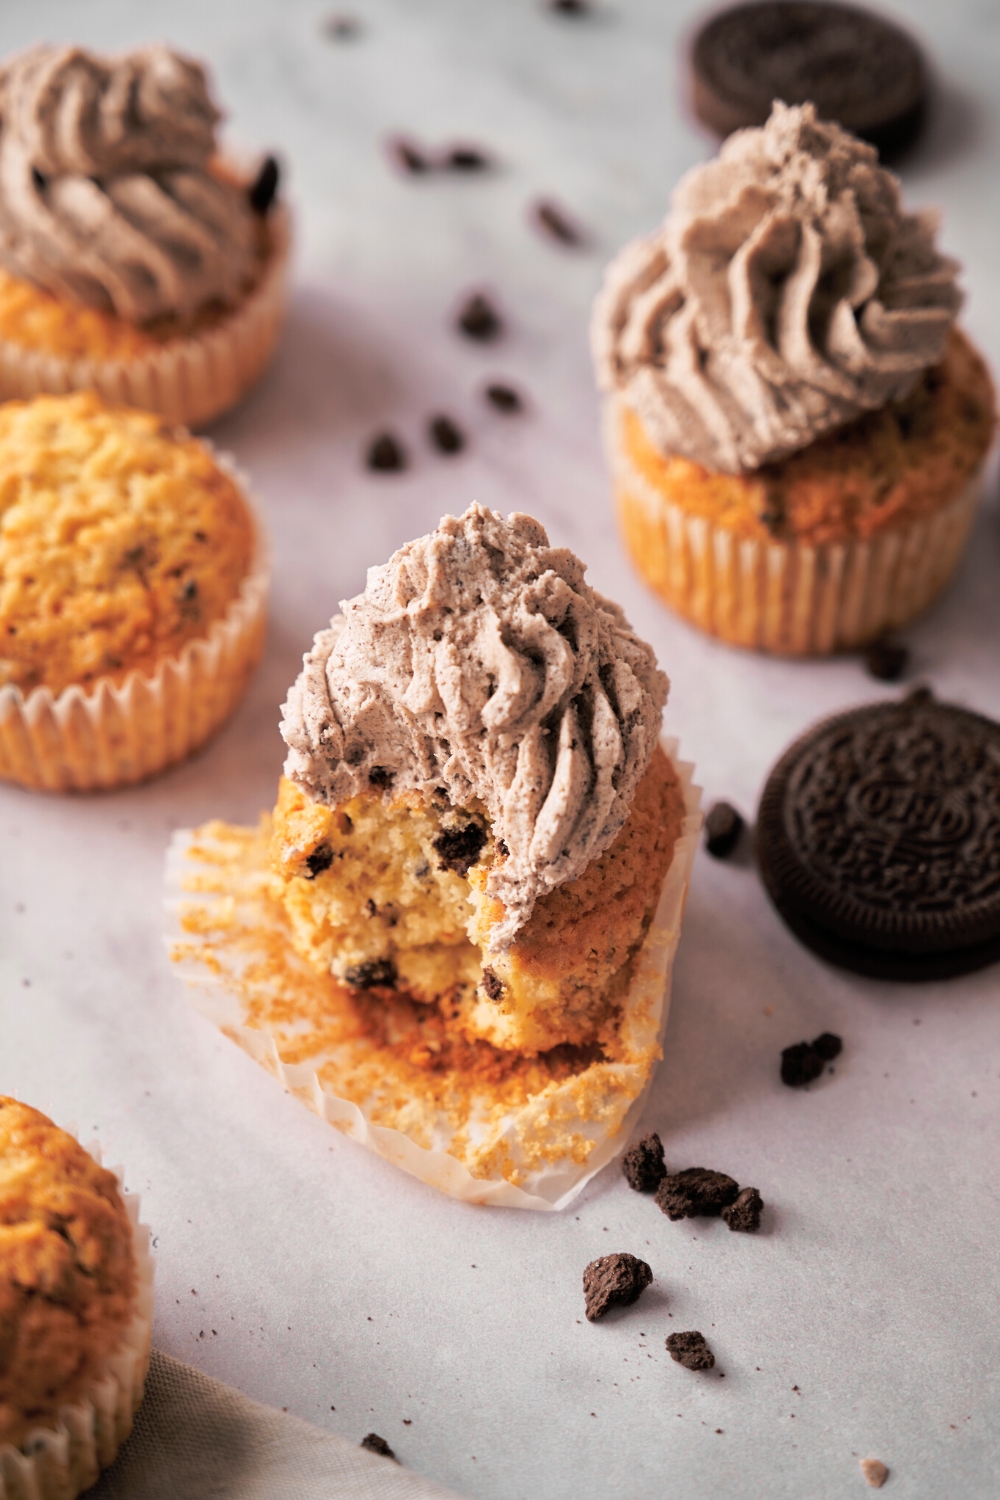 A Oreo cupcake that has a bite out of it on an unwrapped cupcake wrapper with piped frosting on top of the cupcake.